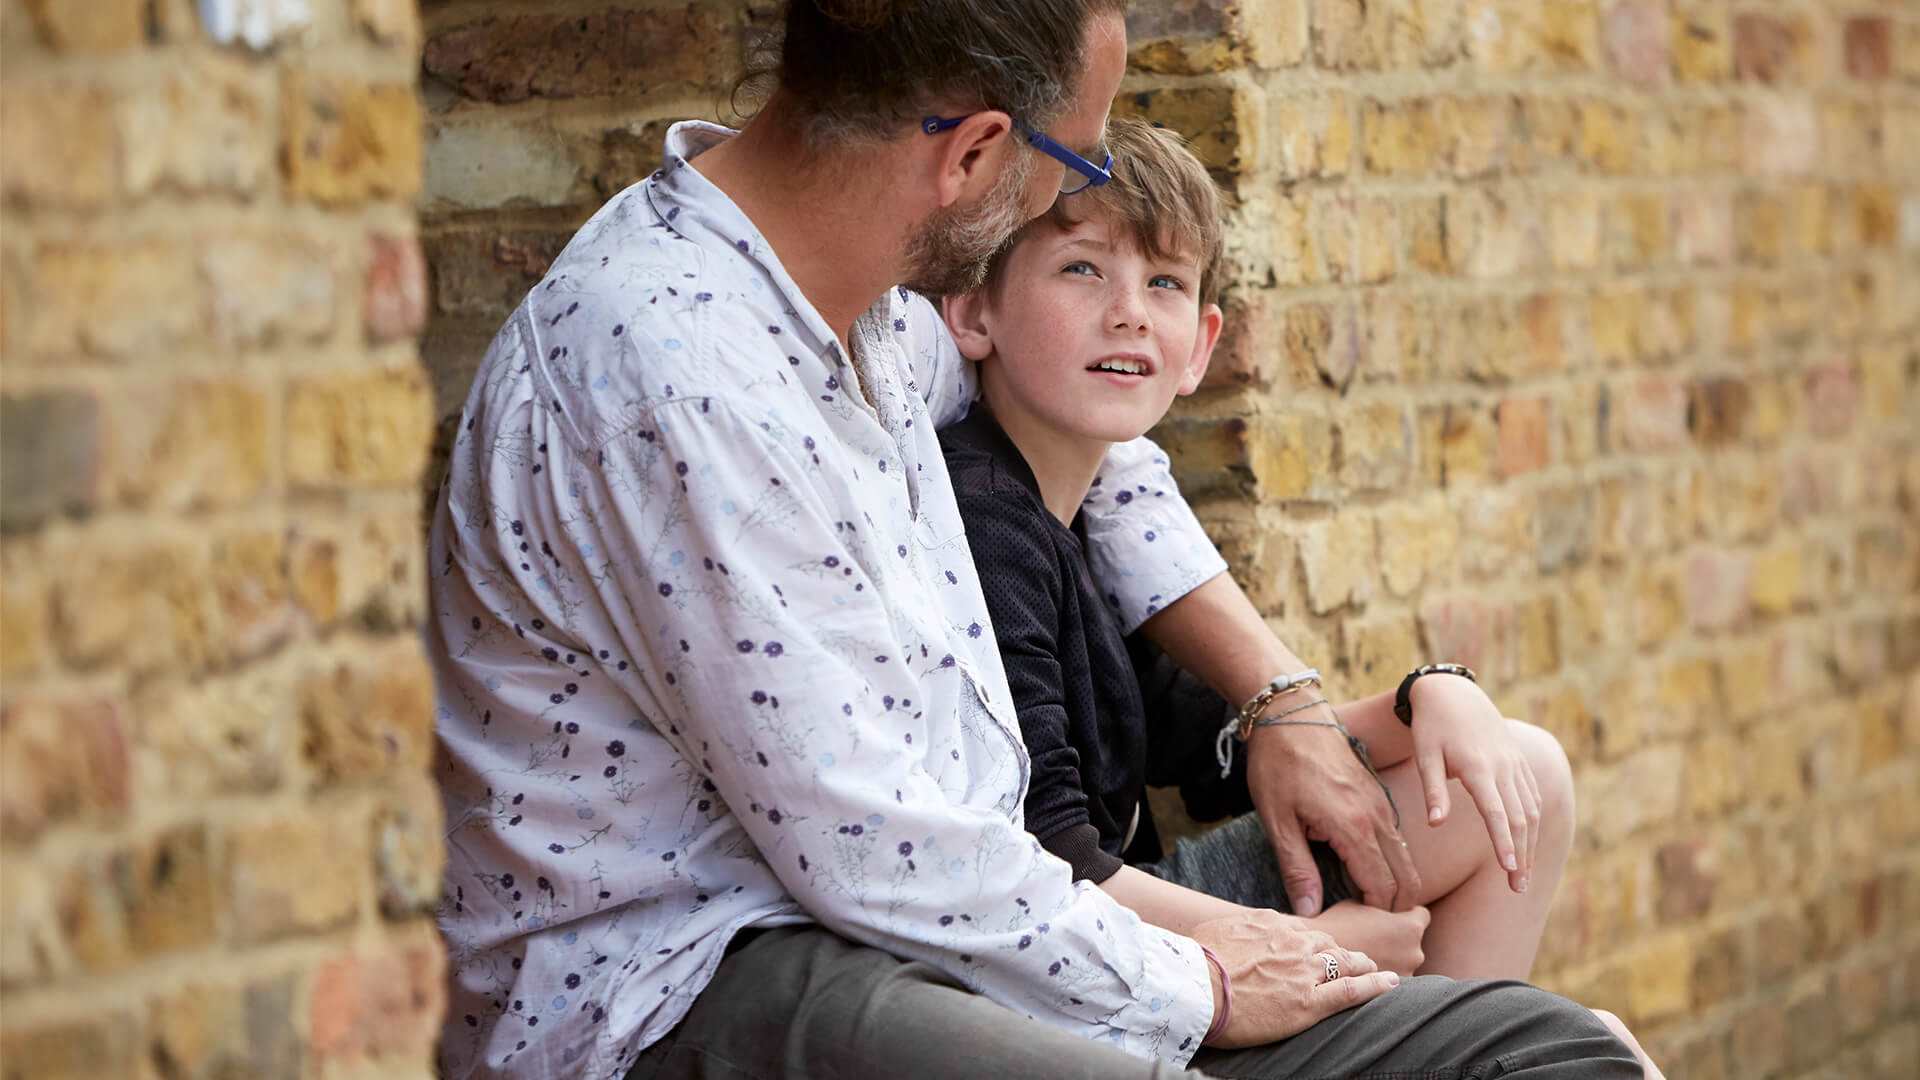 A father with his arm around his son sitting by a wall.